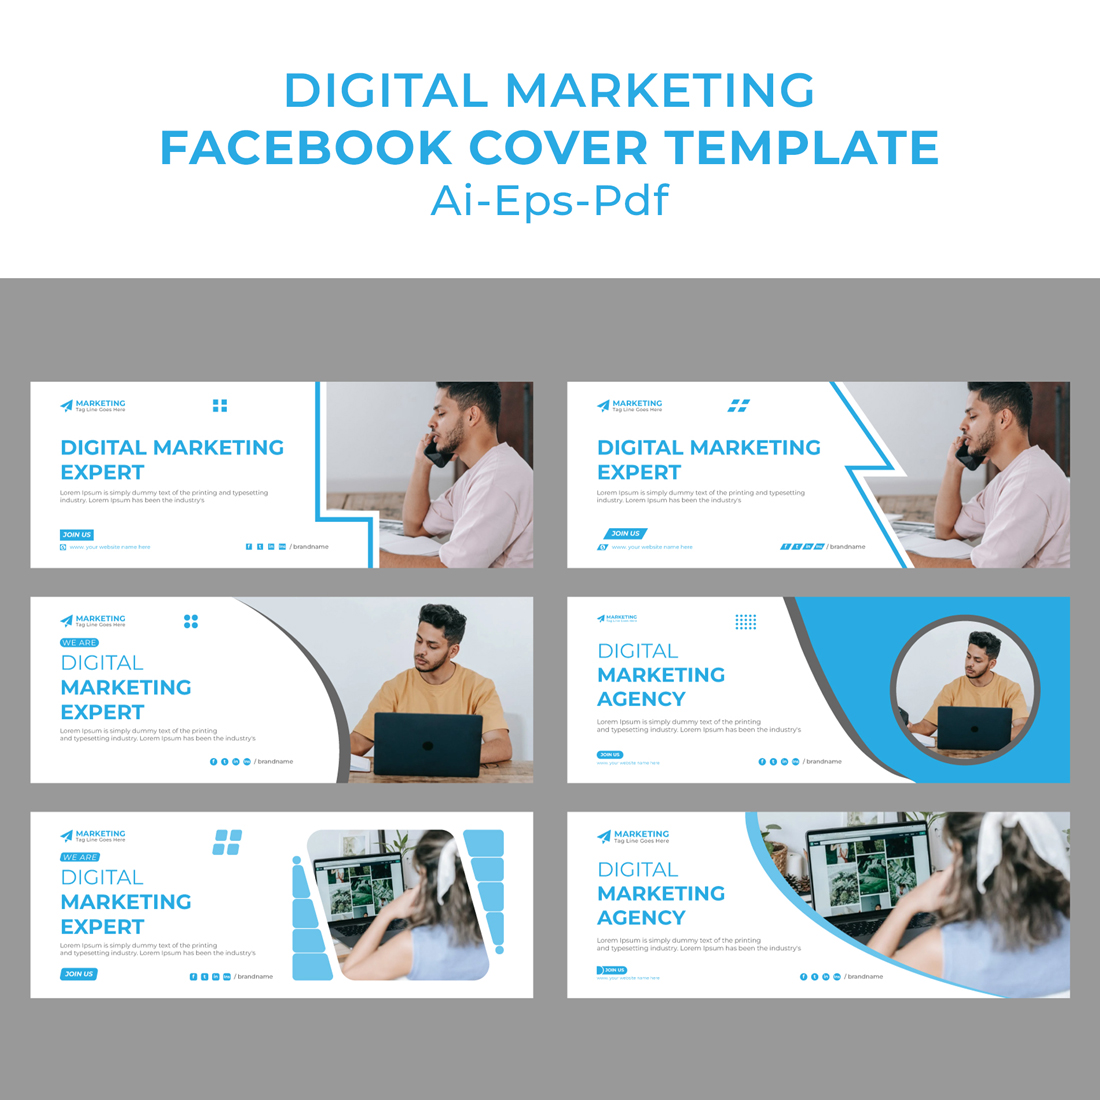 Digital Marketing Facebook Cover Template cover image.